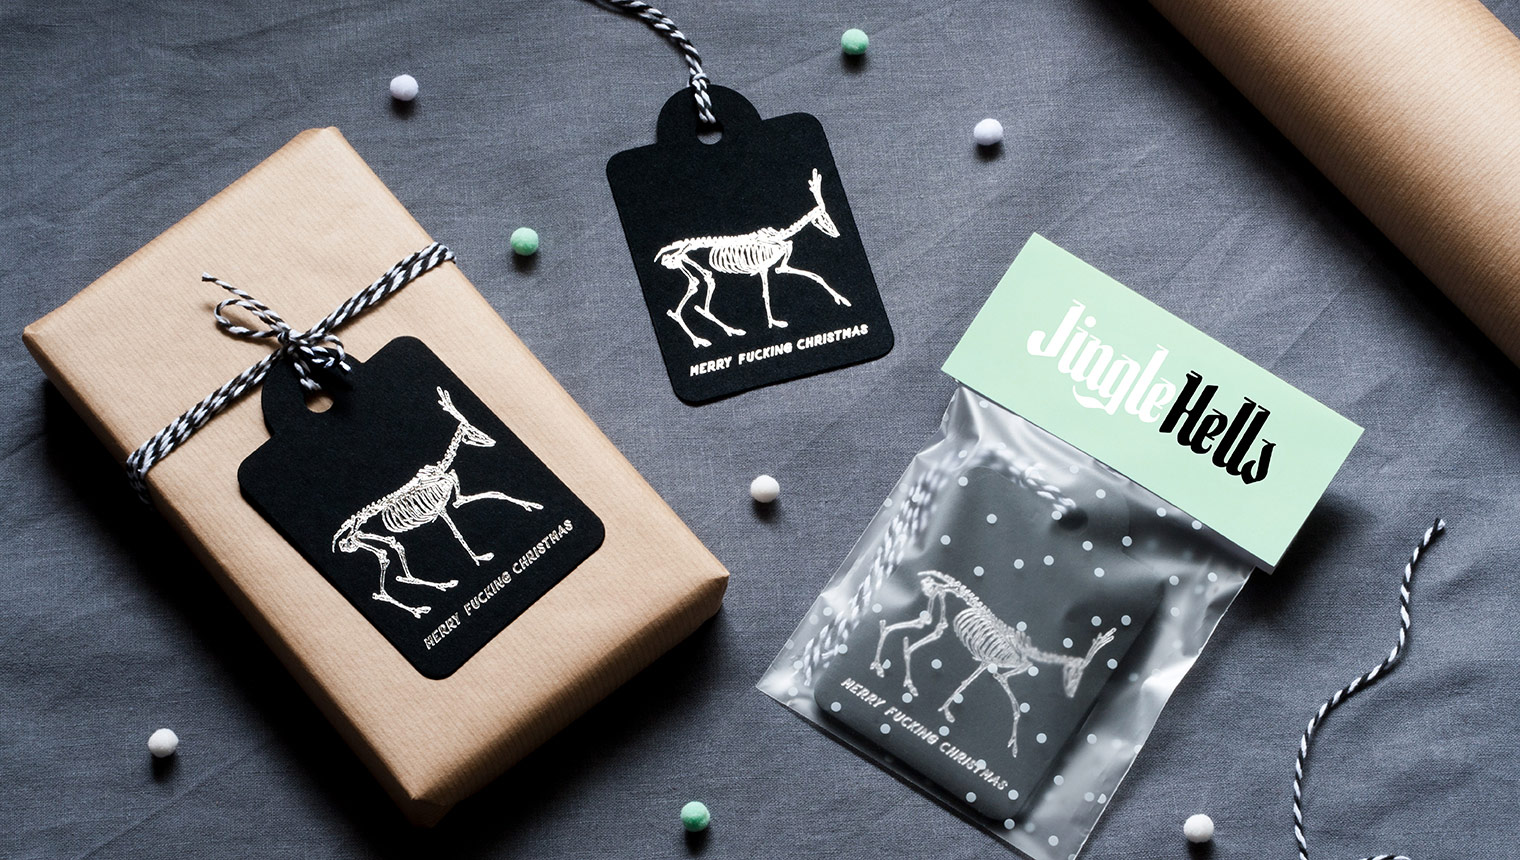 Product flaylay showing alternative foiled swingtags and packaging. The tags feature skeletons of reindeers and say 'Merry Fucking Christmas